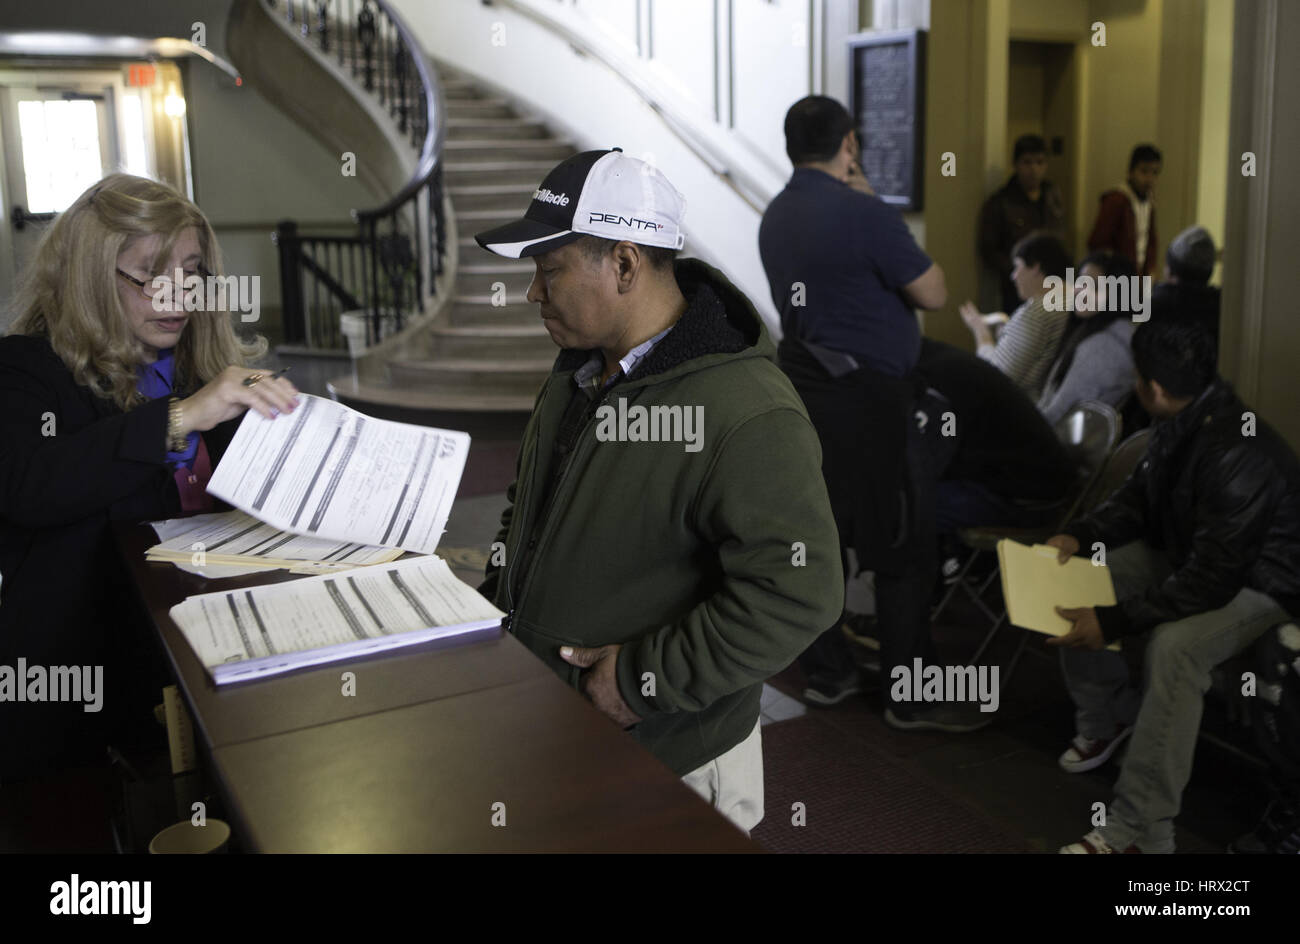 Plainfield, Plainfield, USA. 4th Mar, 2017. FLOR GONZALEZ, left, helps get Santos Garcia, an undocumented immigrant get his identification card at City Hall of Plainfield, New Jersey. The City of Plainfield proclaimed a resolution designating the city as a fair and welcoming community. The City's Clerk office registered nearly 800 undocumented immigrants have been registered with the program since last February, 'officials said. Credit: Brian Branch Price/ZUMA Wire/Alamy Live News Stock Photo